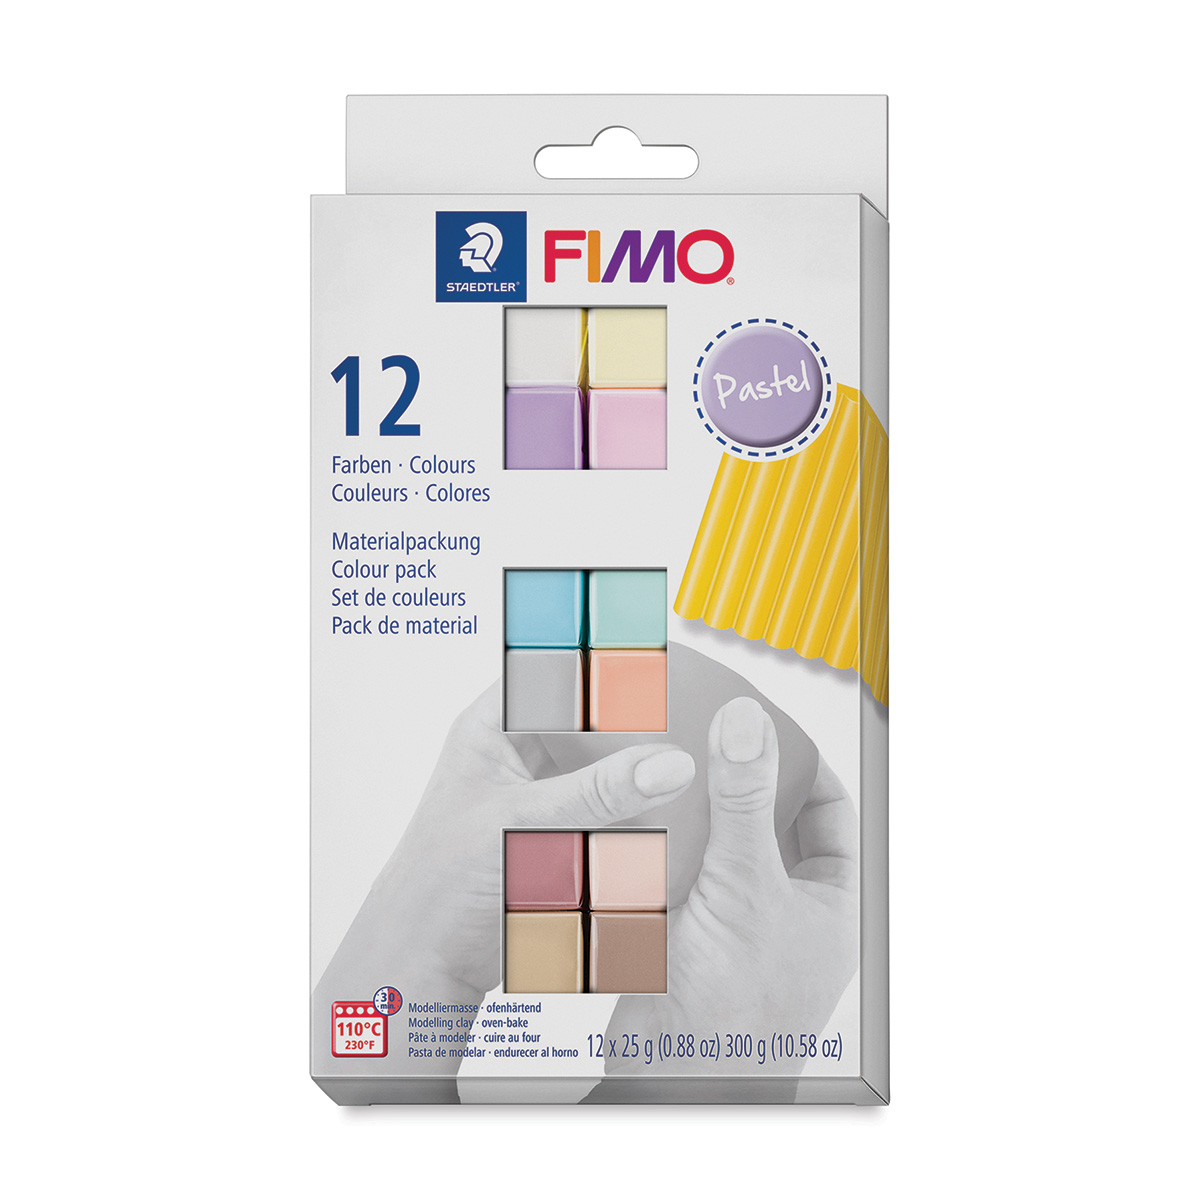 STAEDTLER FIMO Soft Polymer Clay - Oven Bake Clay for Modeling, Jewelry,  Sculpting, 1 lb Block, White 8021-0, 454 (8021-1LB-0)